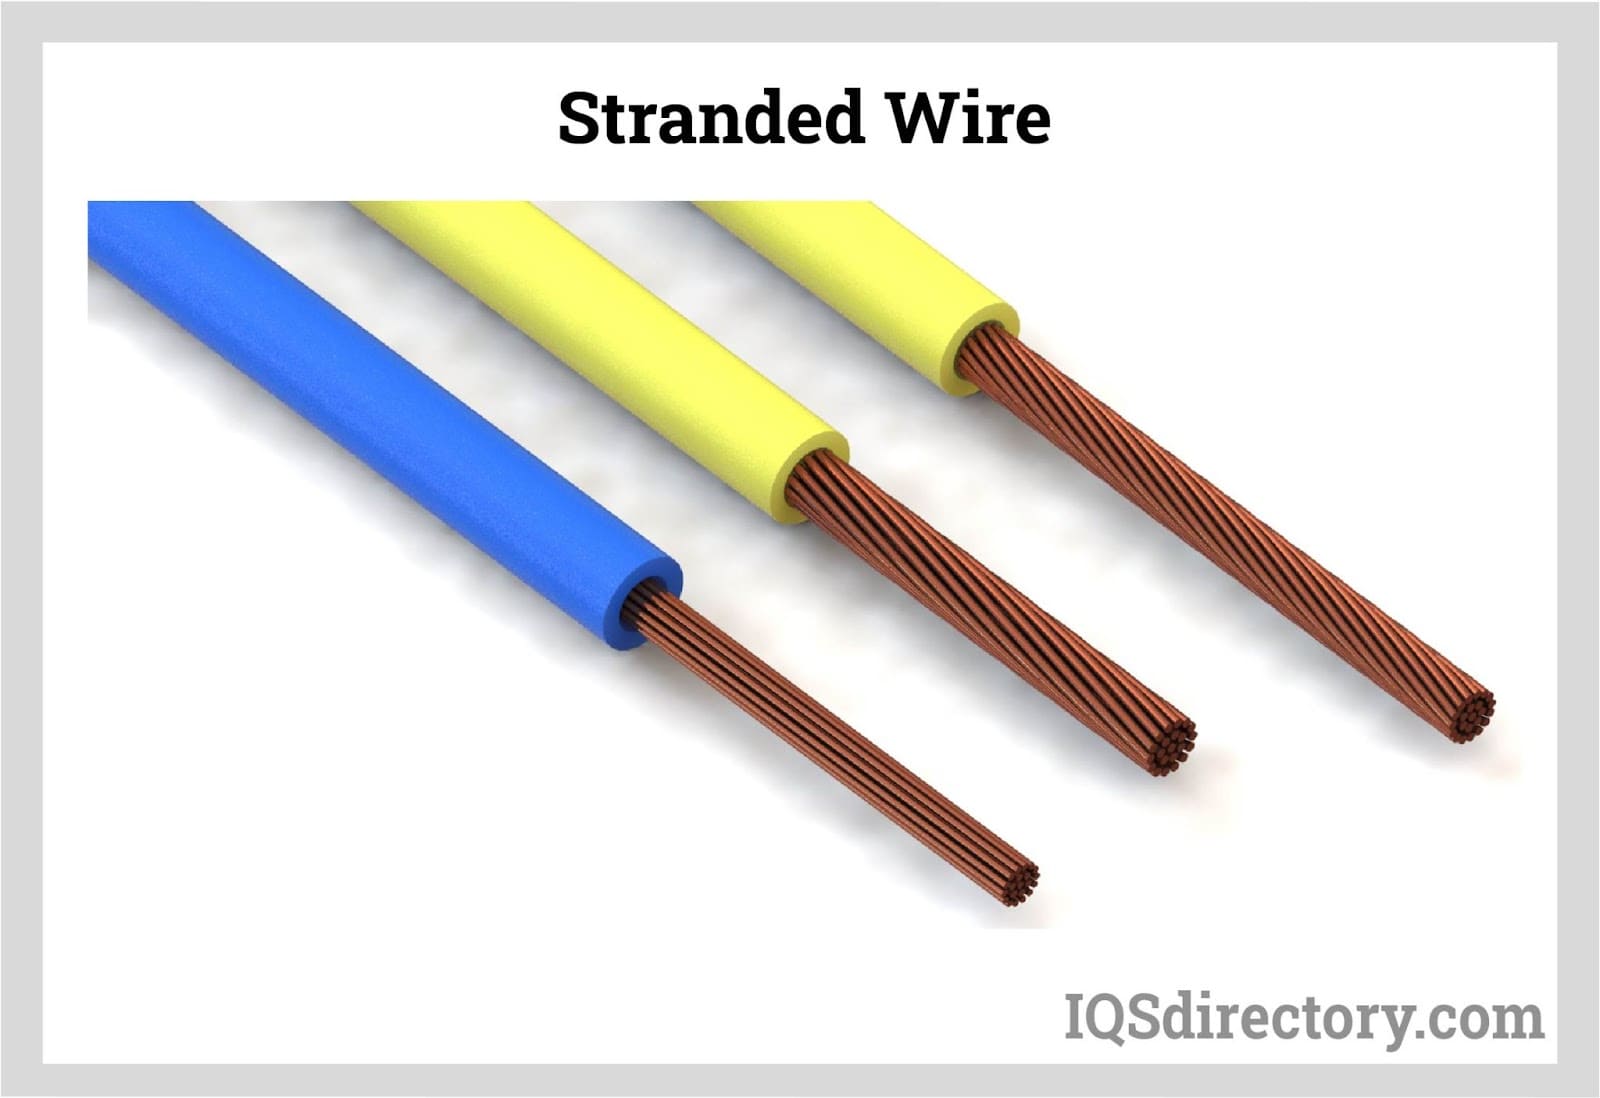 Stranded Wire, Braided Wire, and Wire Strands